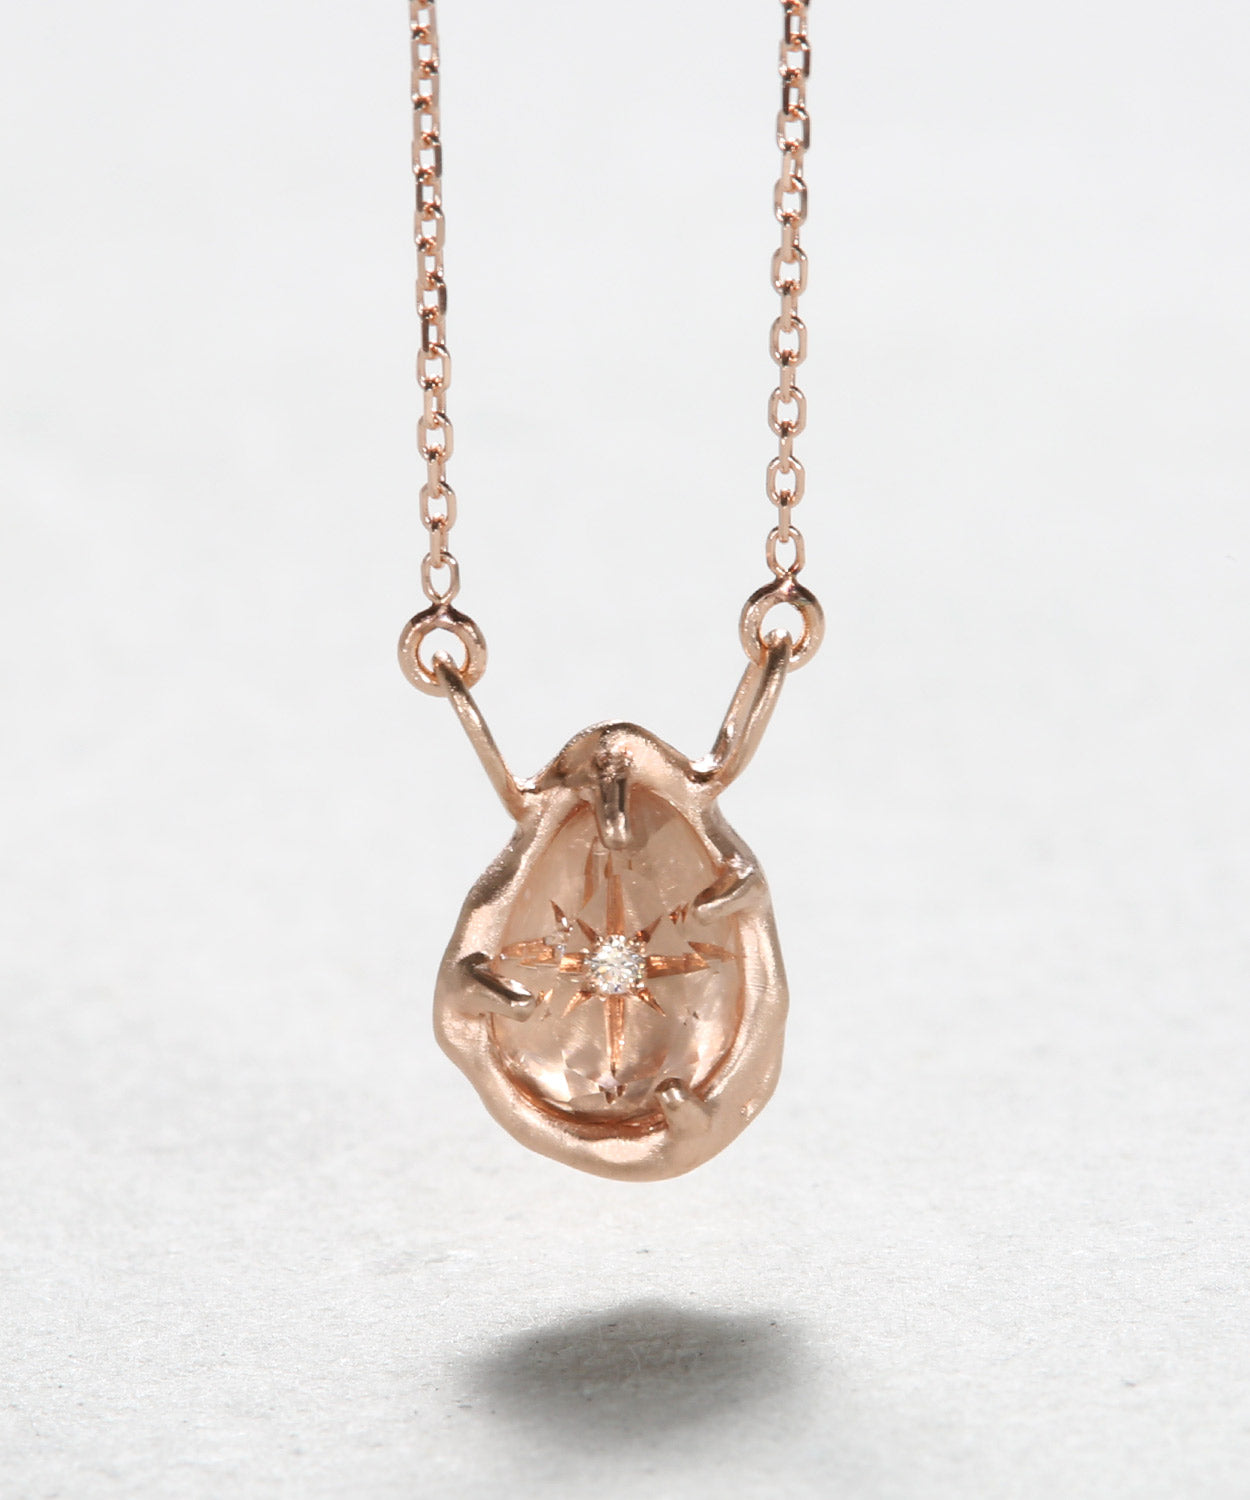 Starry Morganite Necklace